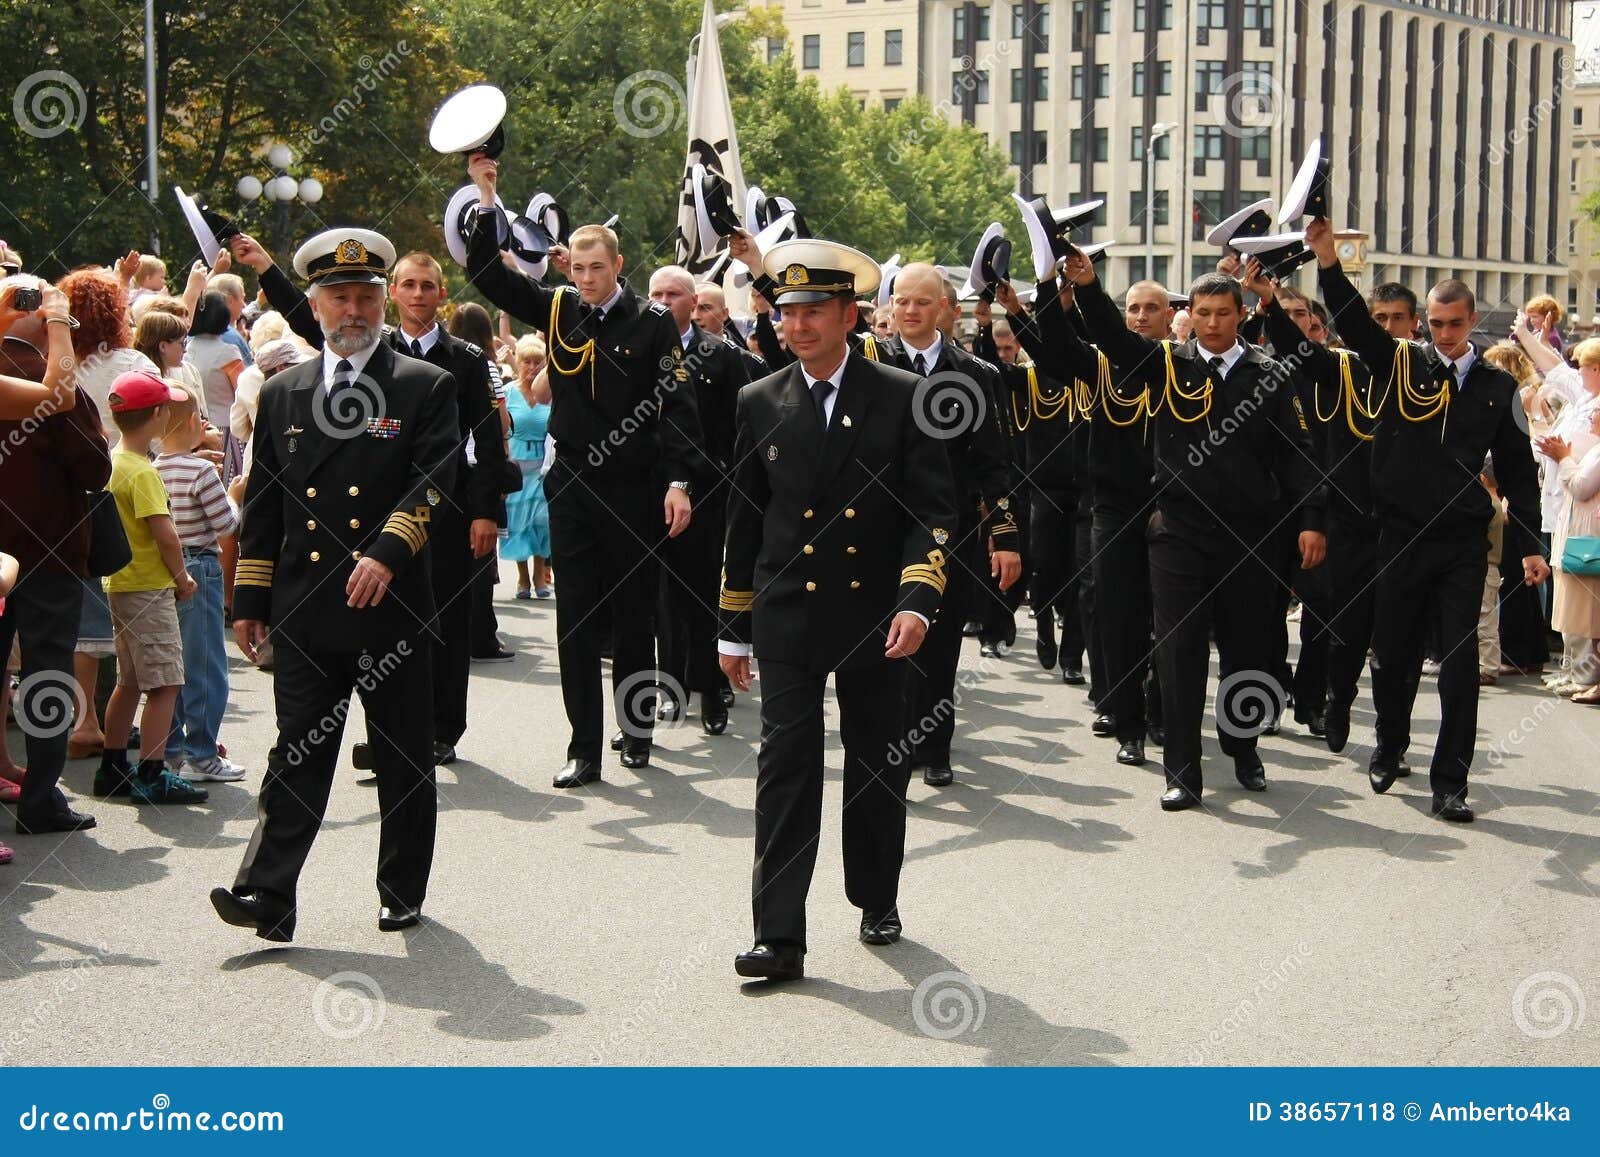 Parade Crew of the ship. RIGA, LATVIA - JULY 27th: Crew Parade during the second stage of the World Cup The Tall Ships Races 2013 in Riga, paraded through the streets of Riga, Latvia, July 27th, 2013